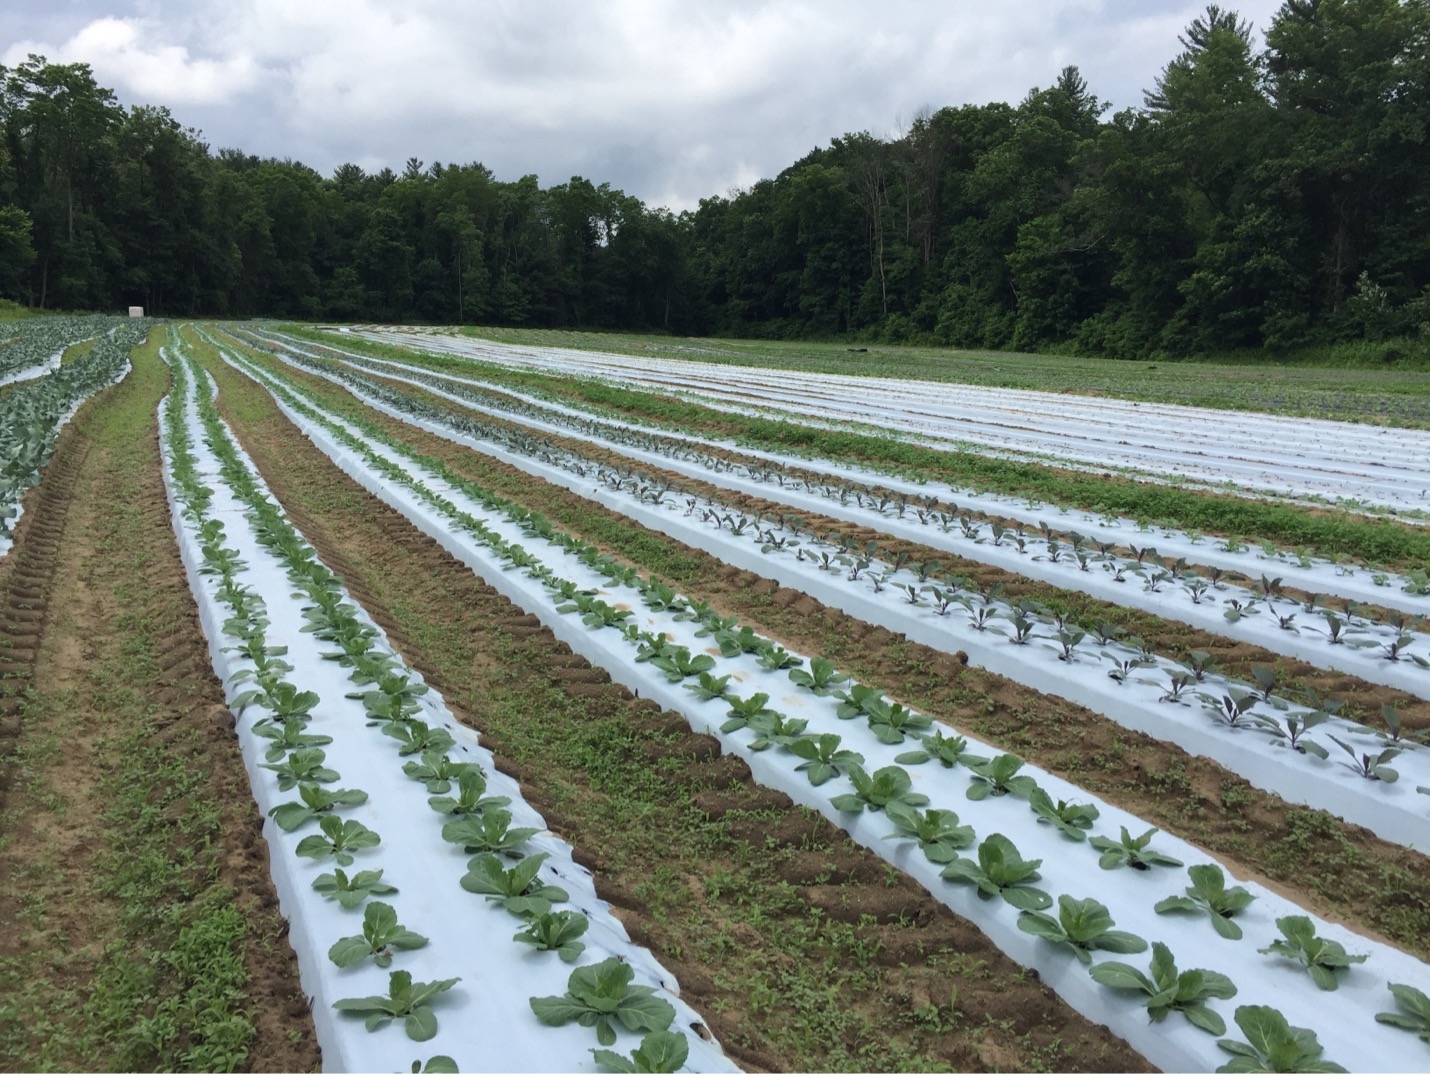 rows of vegetables covered in white biodegradable mulch